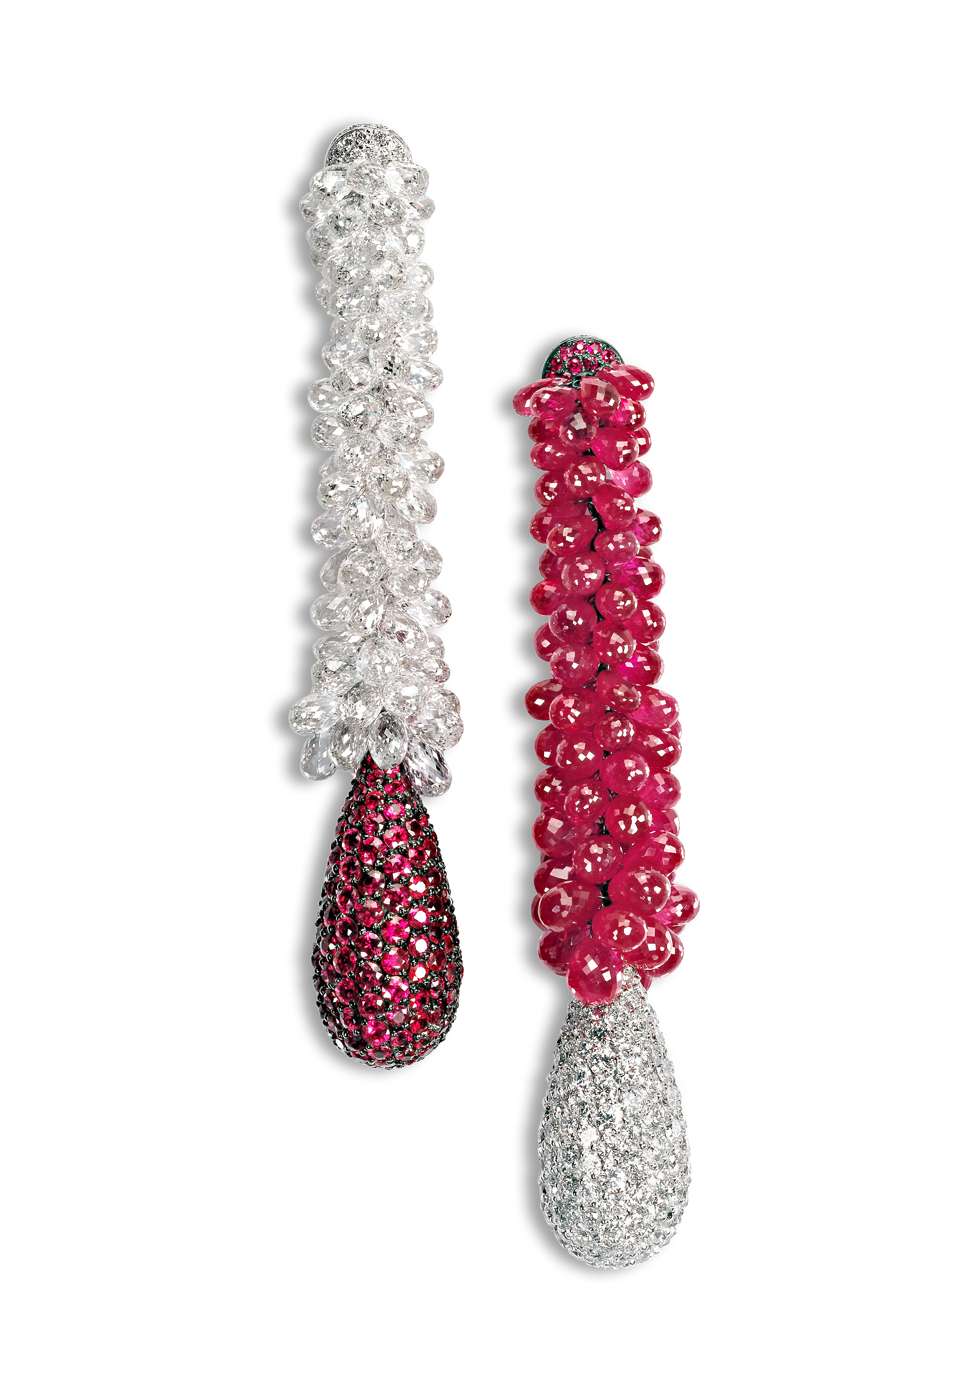 The 18 ct white gold earrings set with diamonds and rubies play with the contrasting colours of the gemstones to create a modern statement. Price on request